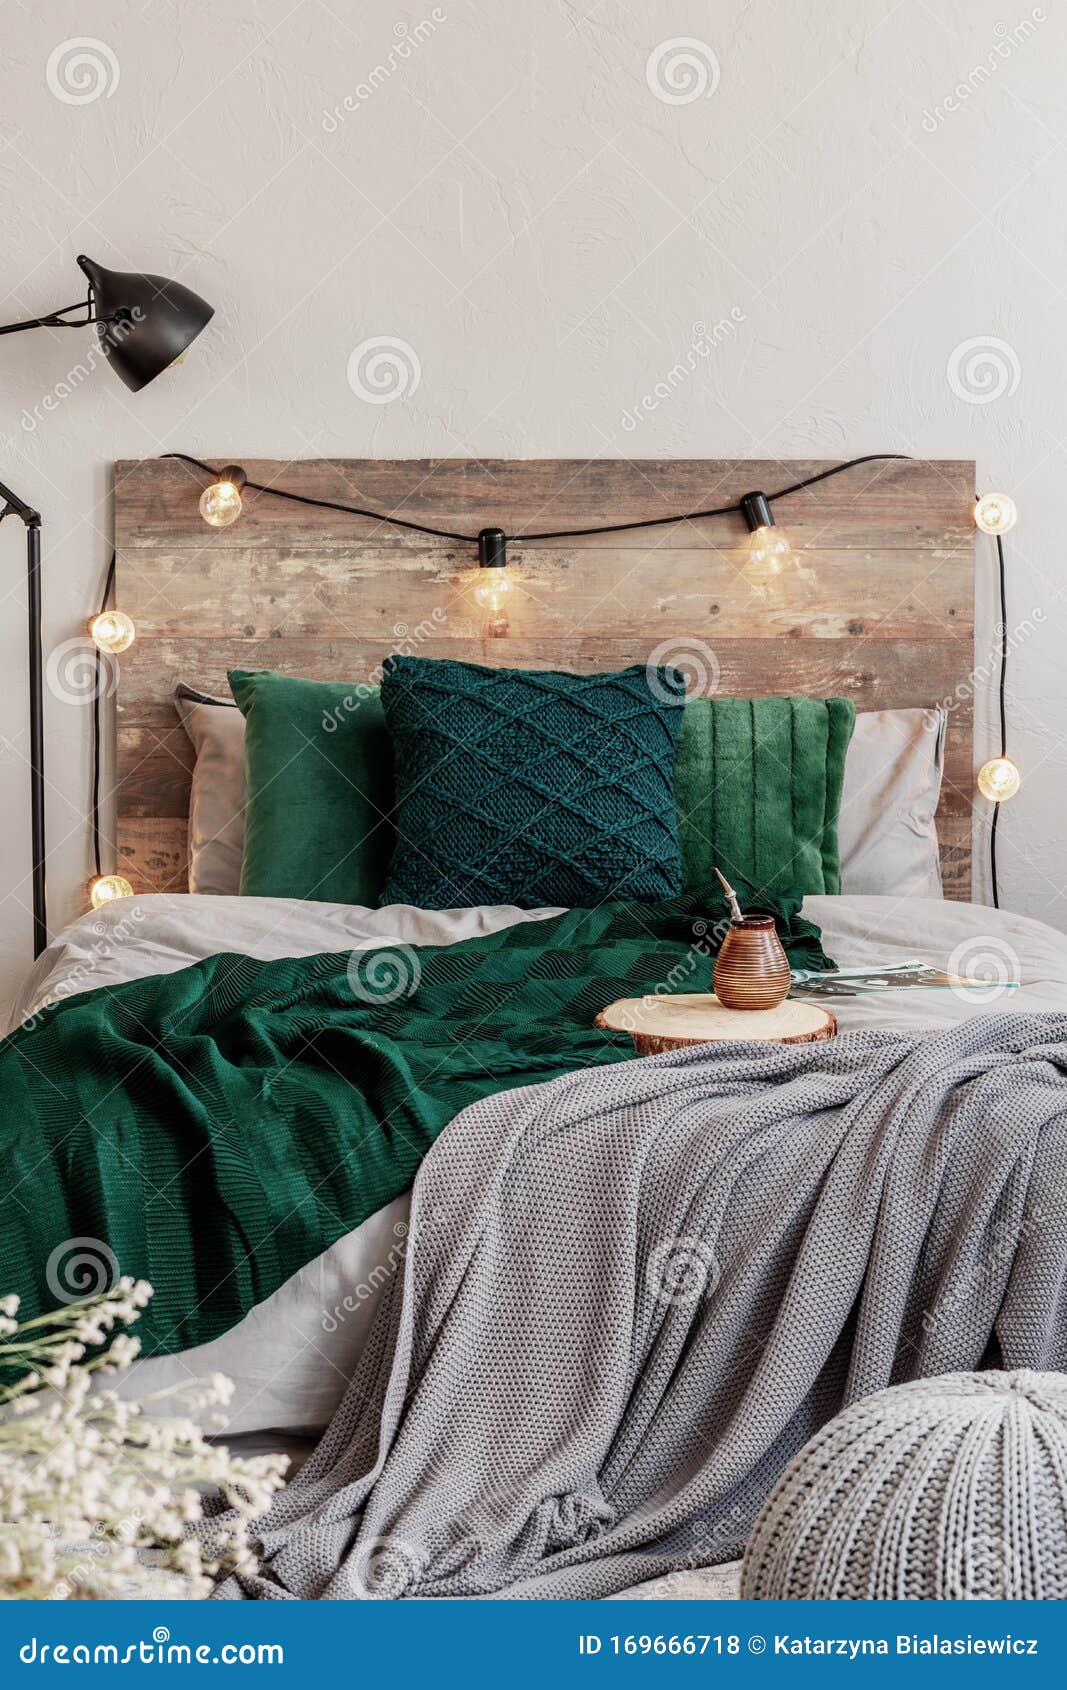 Emerald Green Pillows And Blanket On Wooden King Size Bed With Grey Bedding Stock Photo Image Of Farm